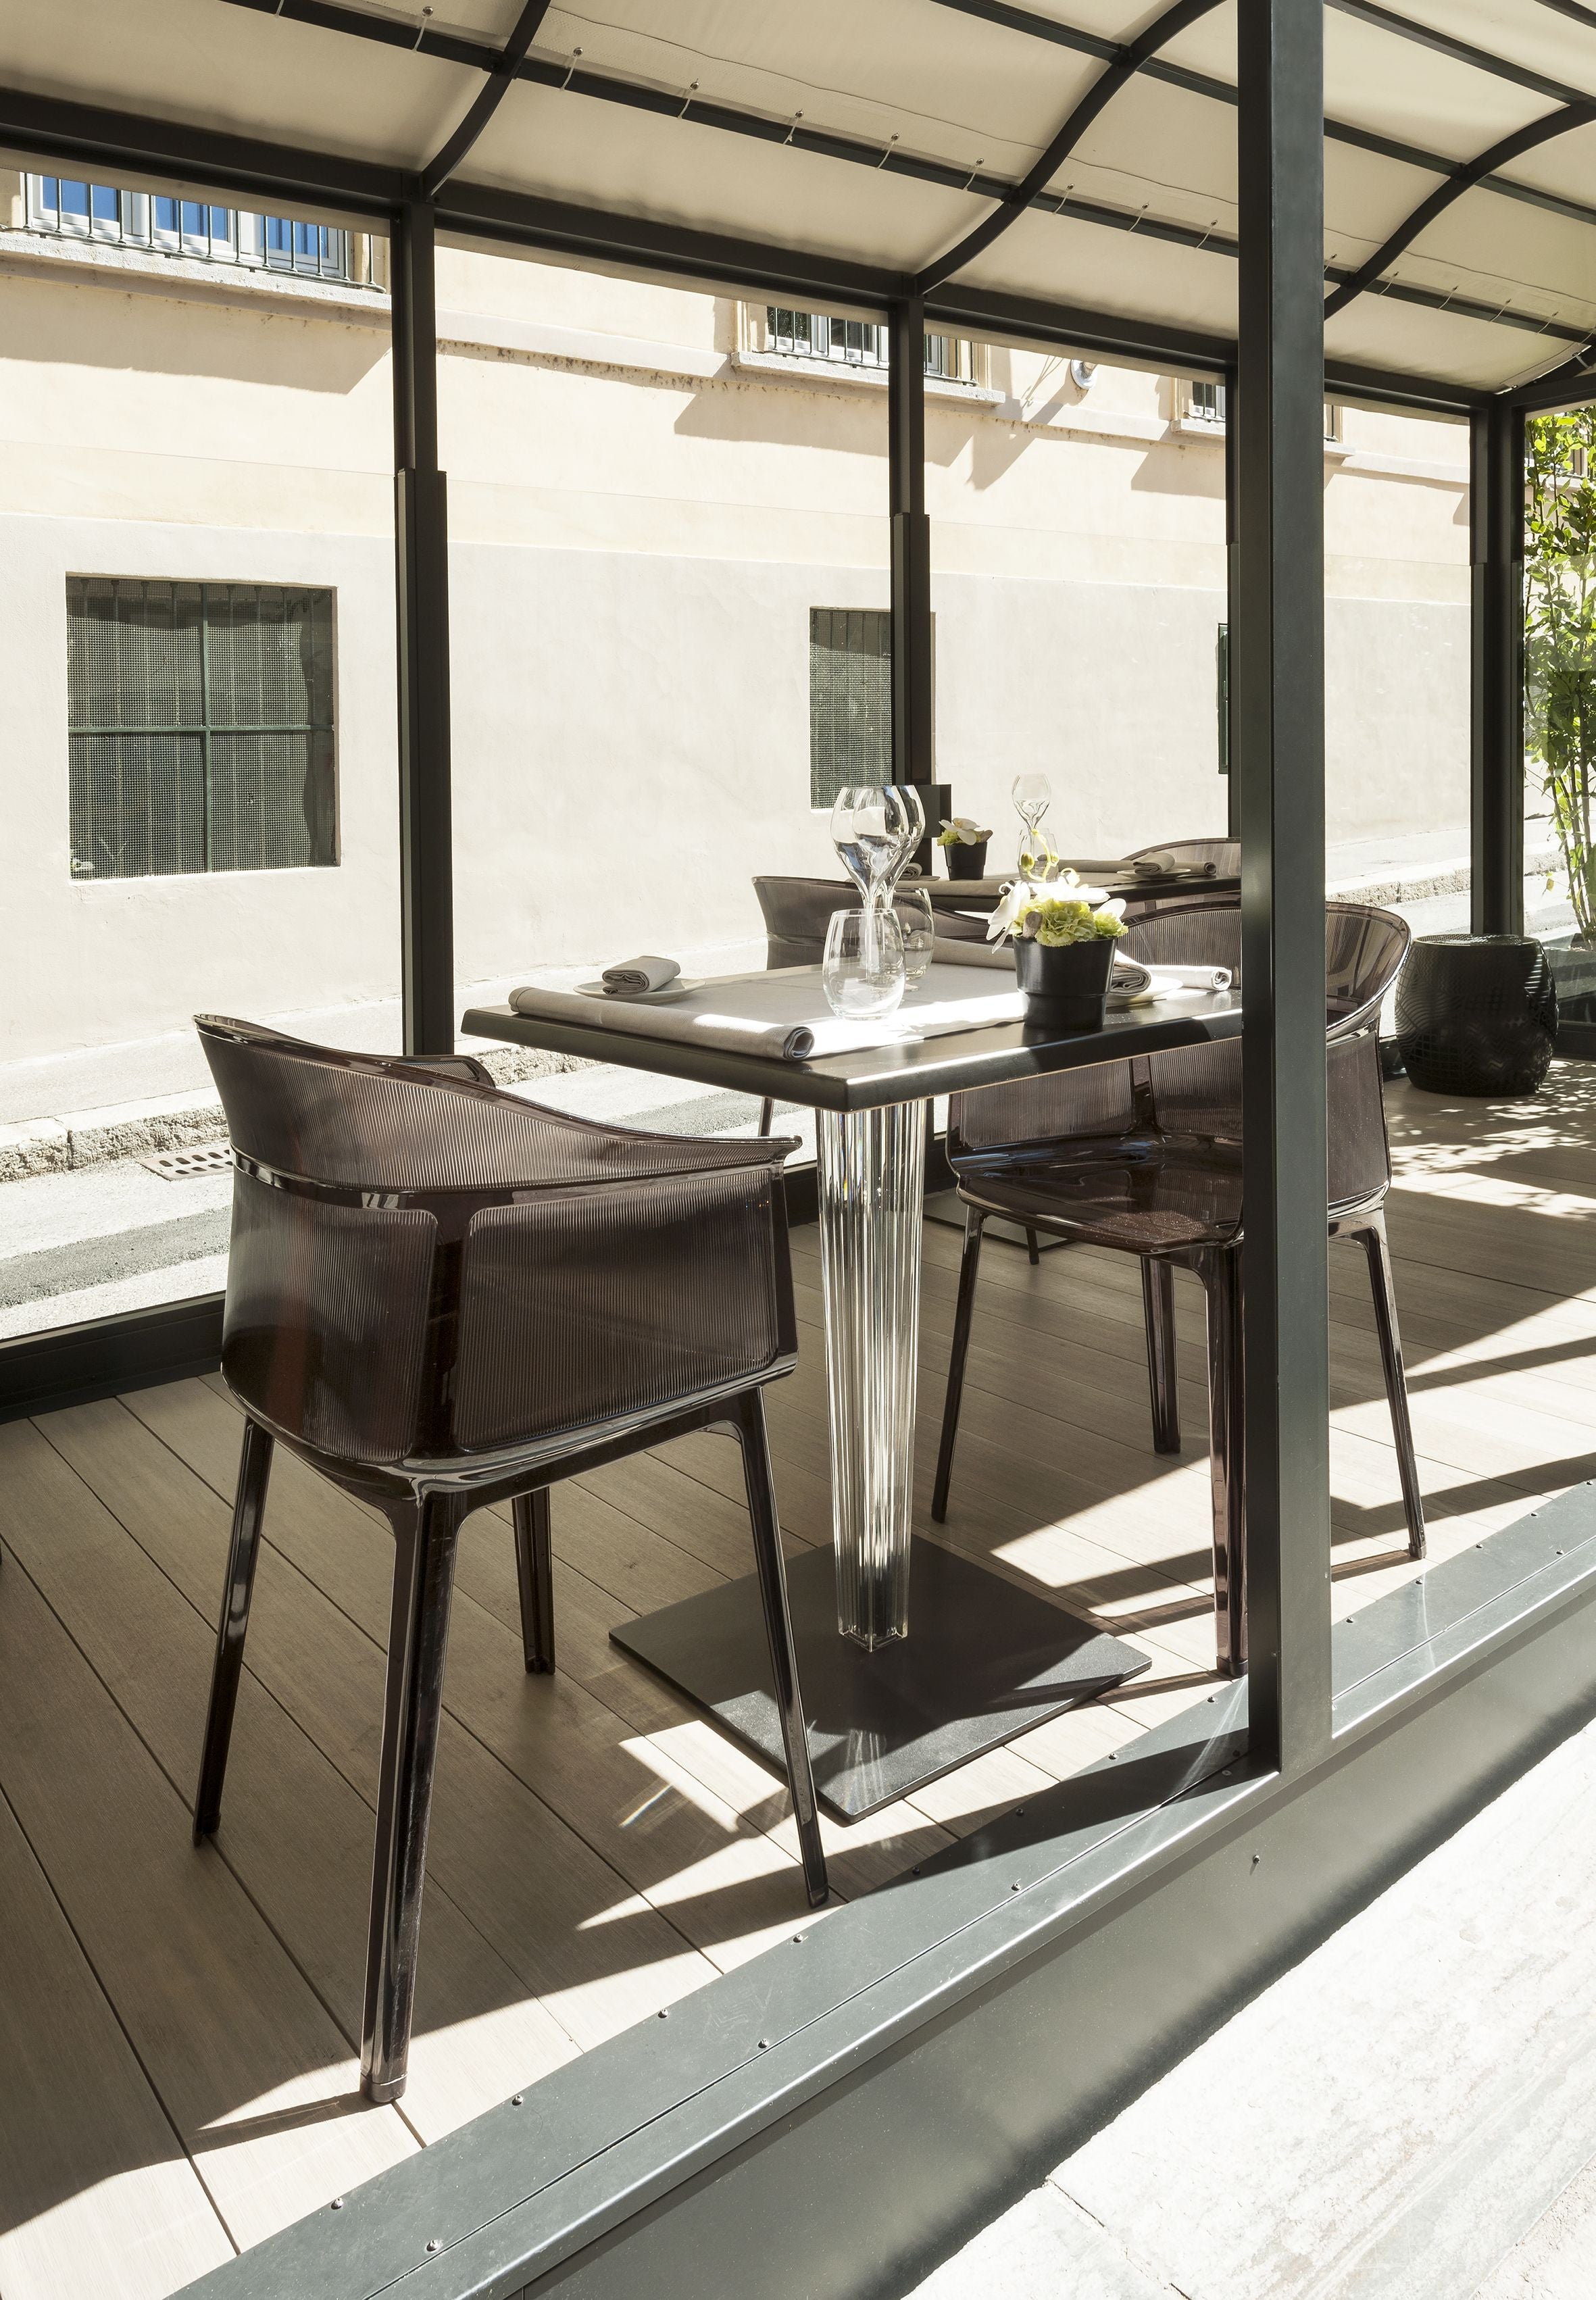 Kartell Top Top Table Glass 190x90 cm, nero